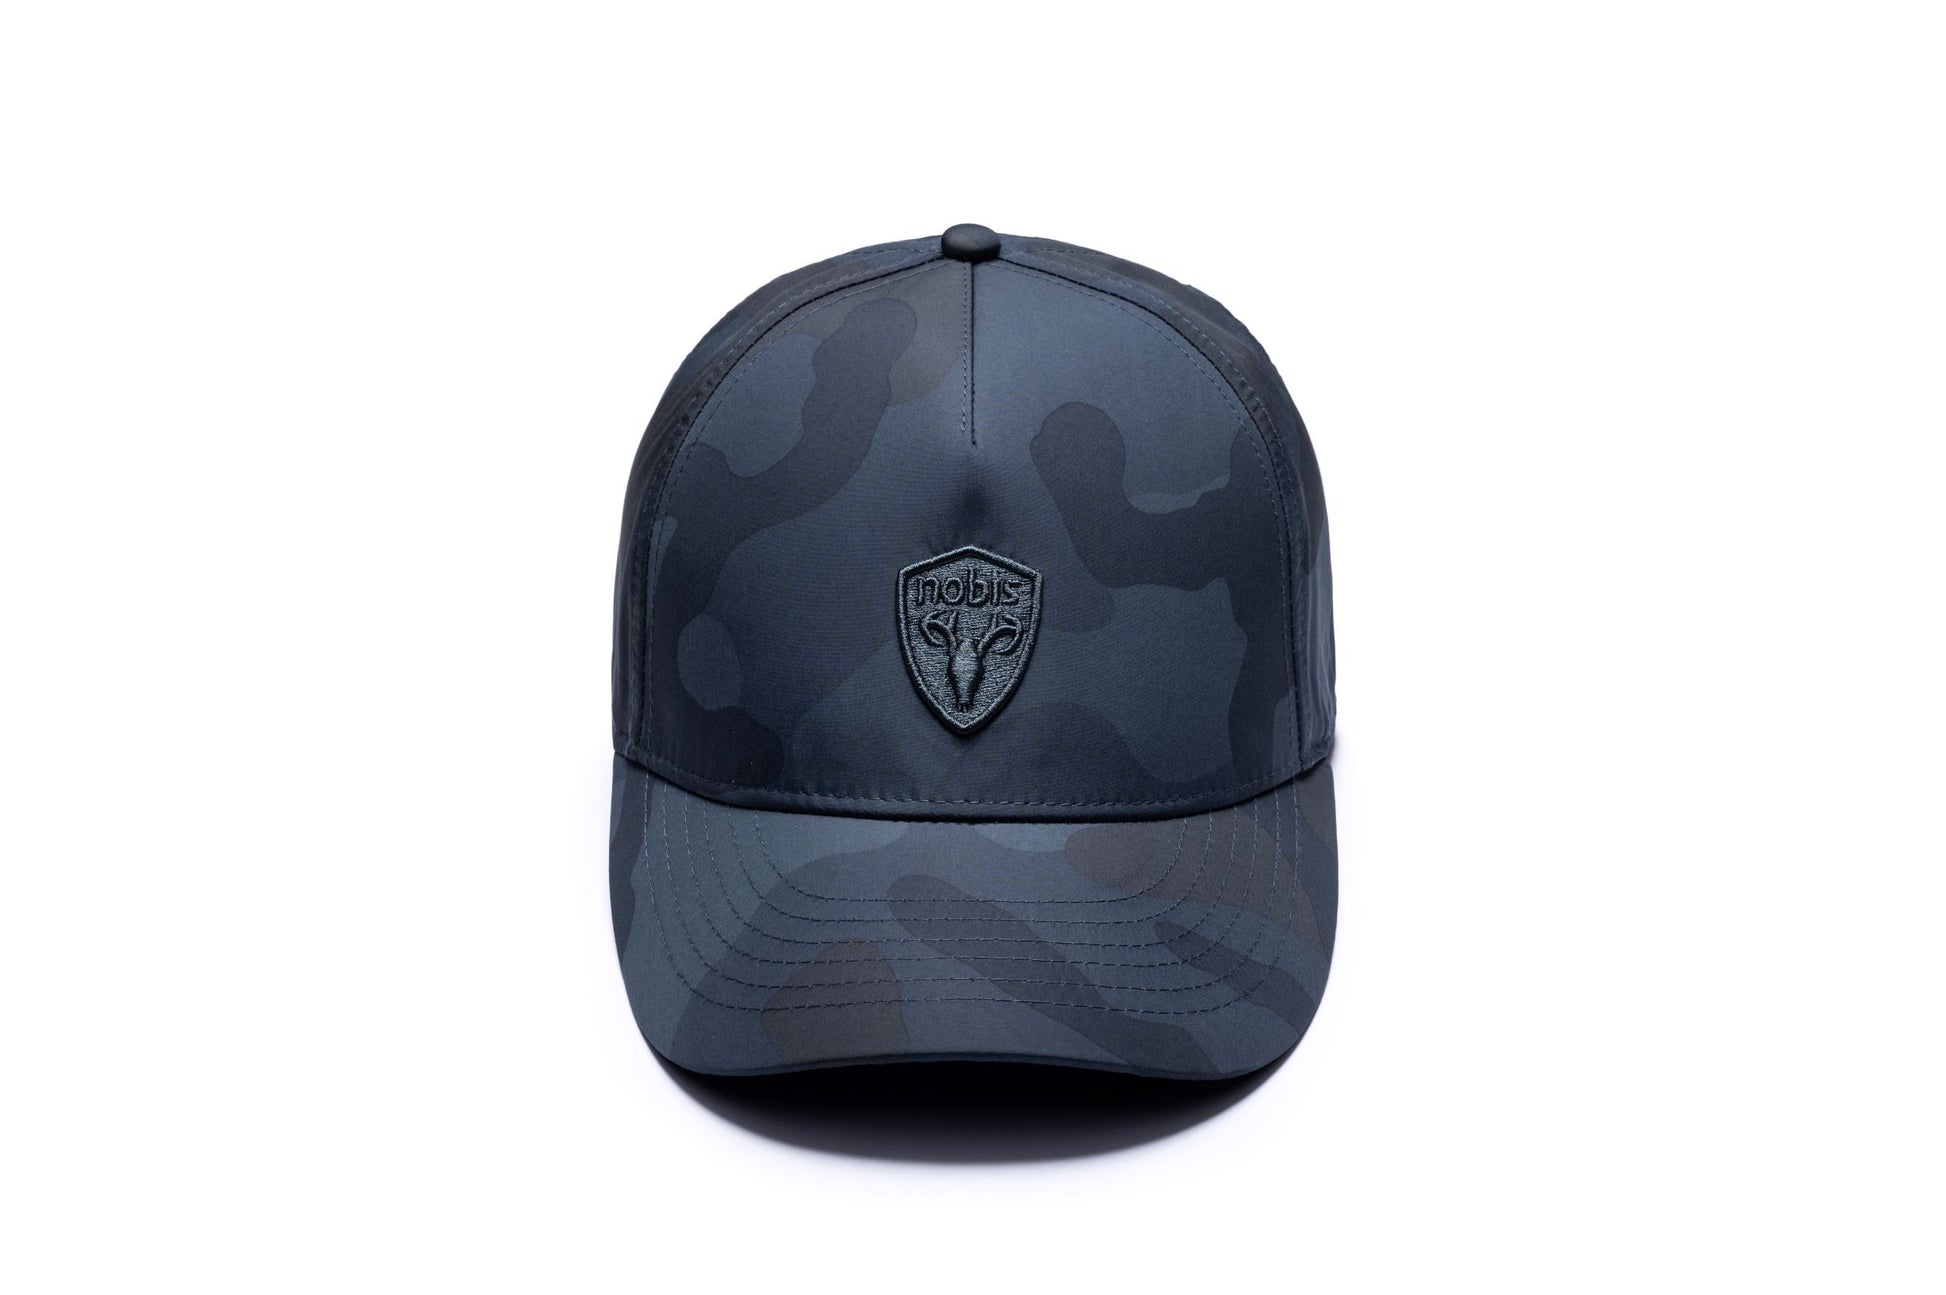 Five panel baseball hat with adjustable back in Navy Camo